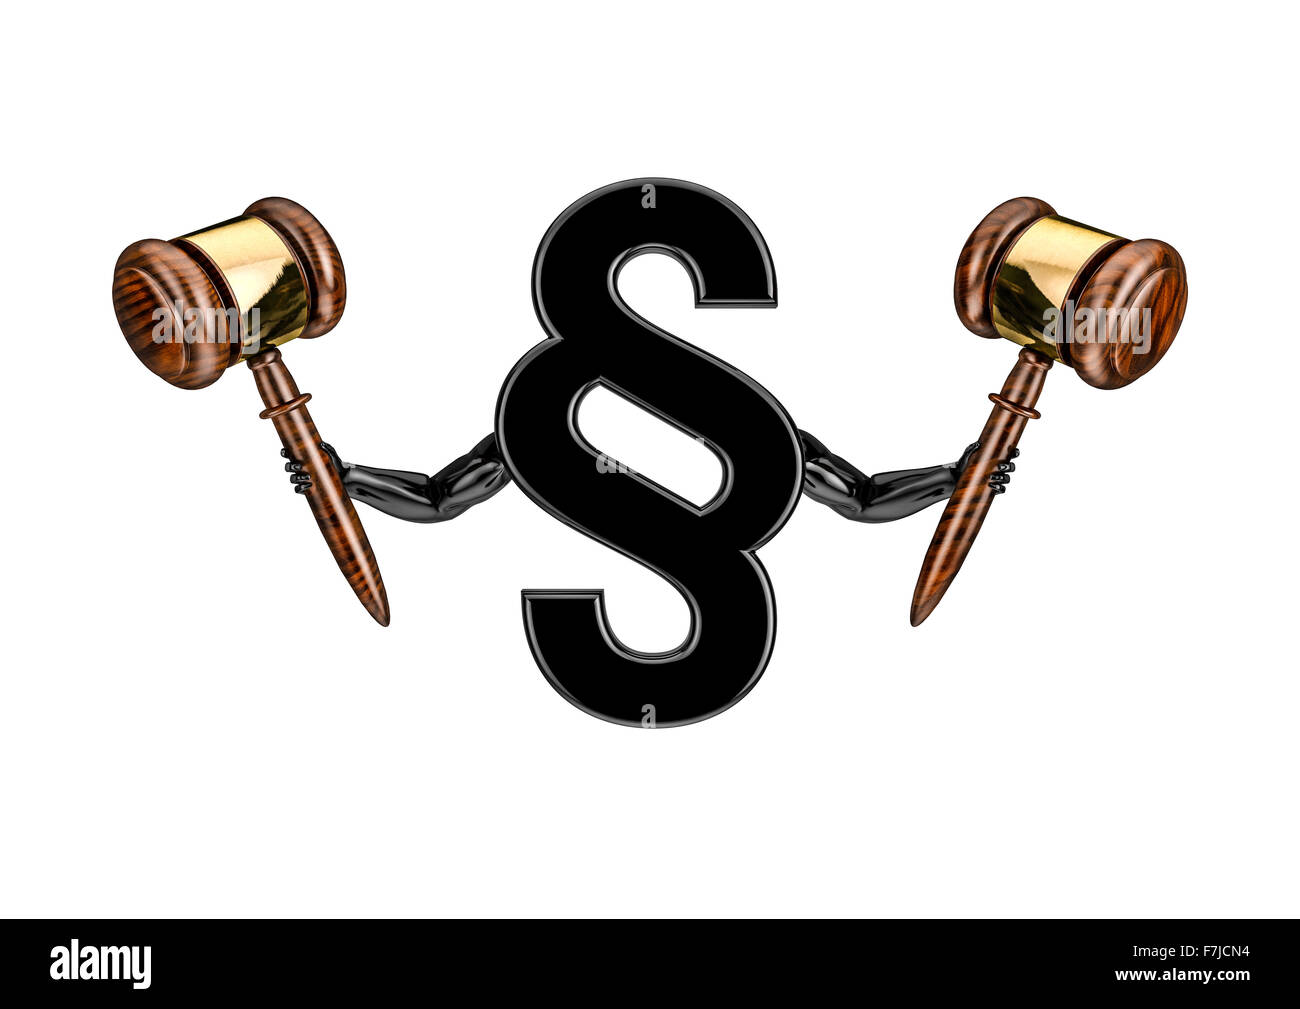 I am the law / 3D render of section sign holding judges gavels Stock Photo